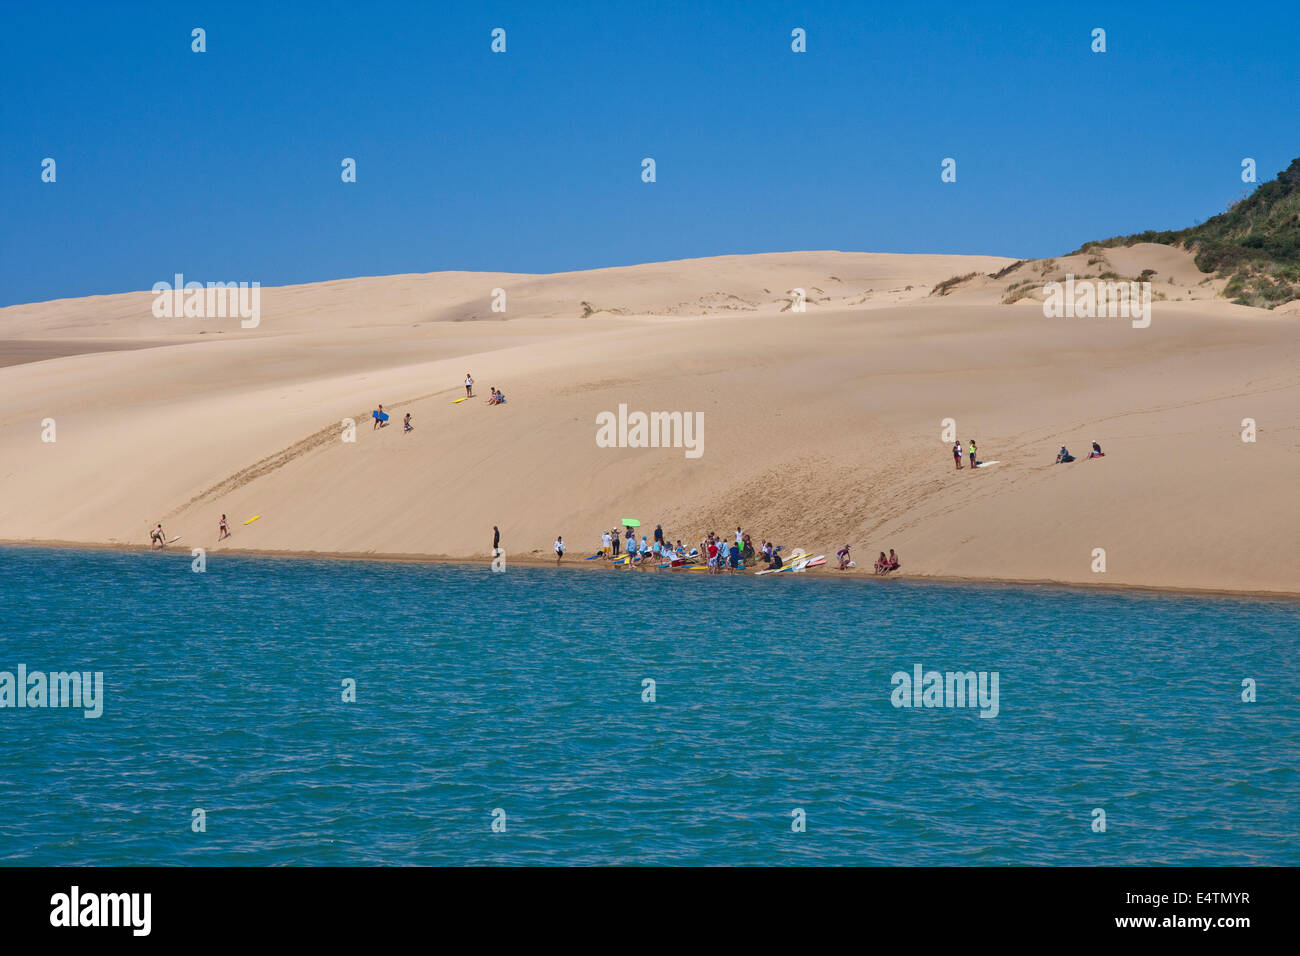 Group of sand boarders in Hokianga Harbour Stock Photo